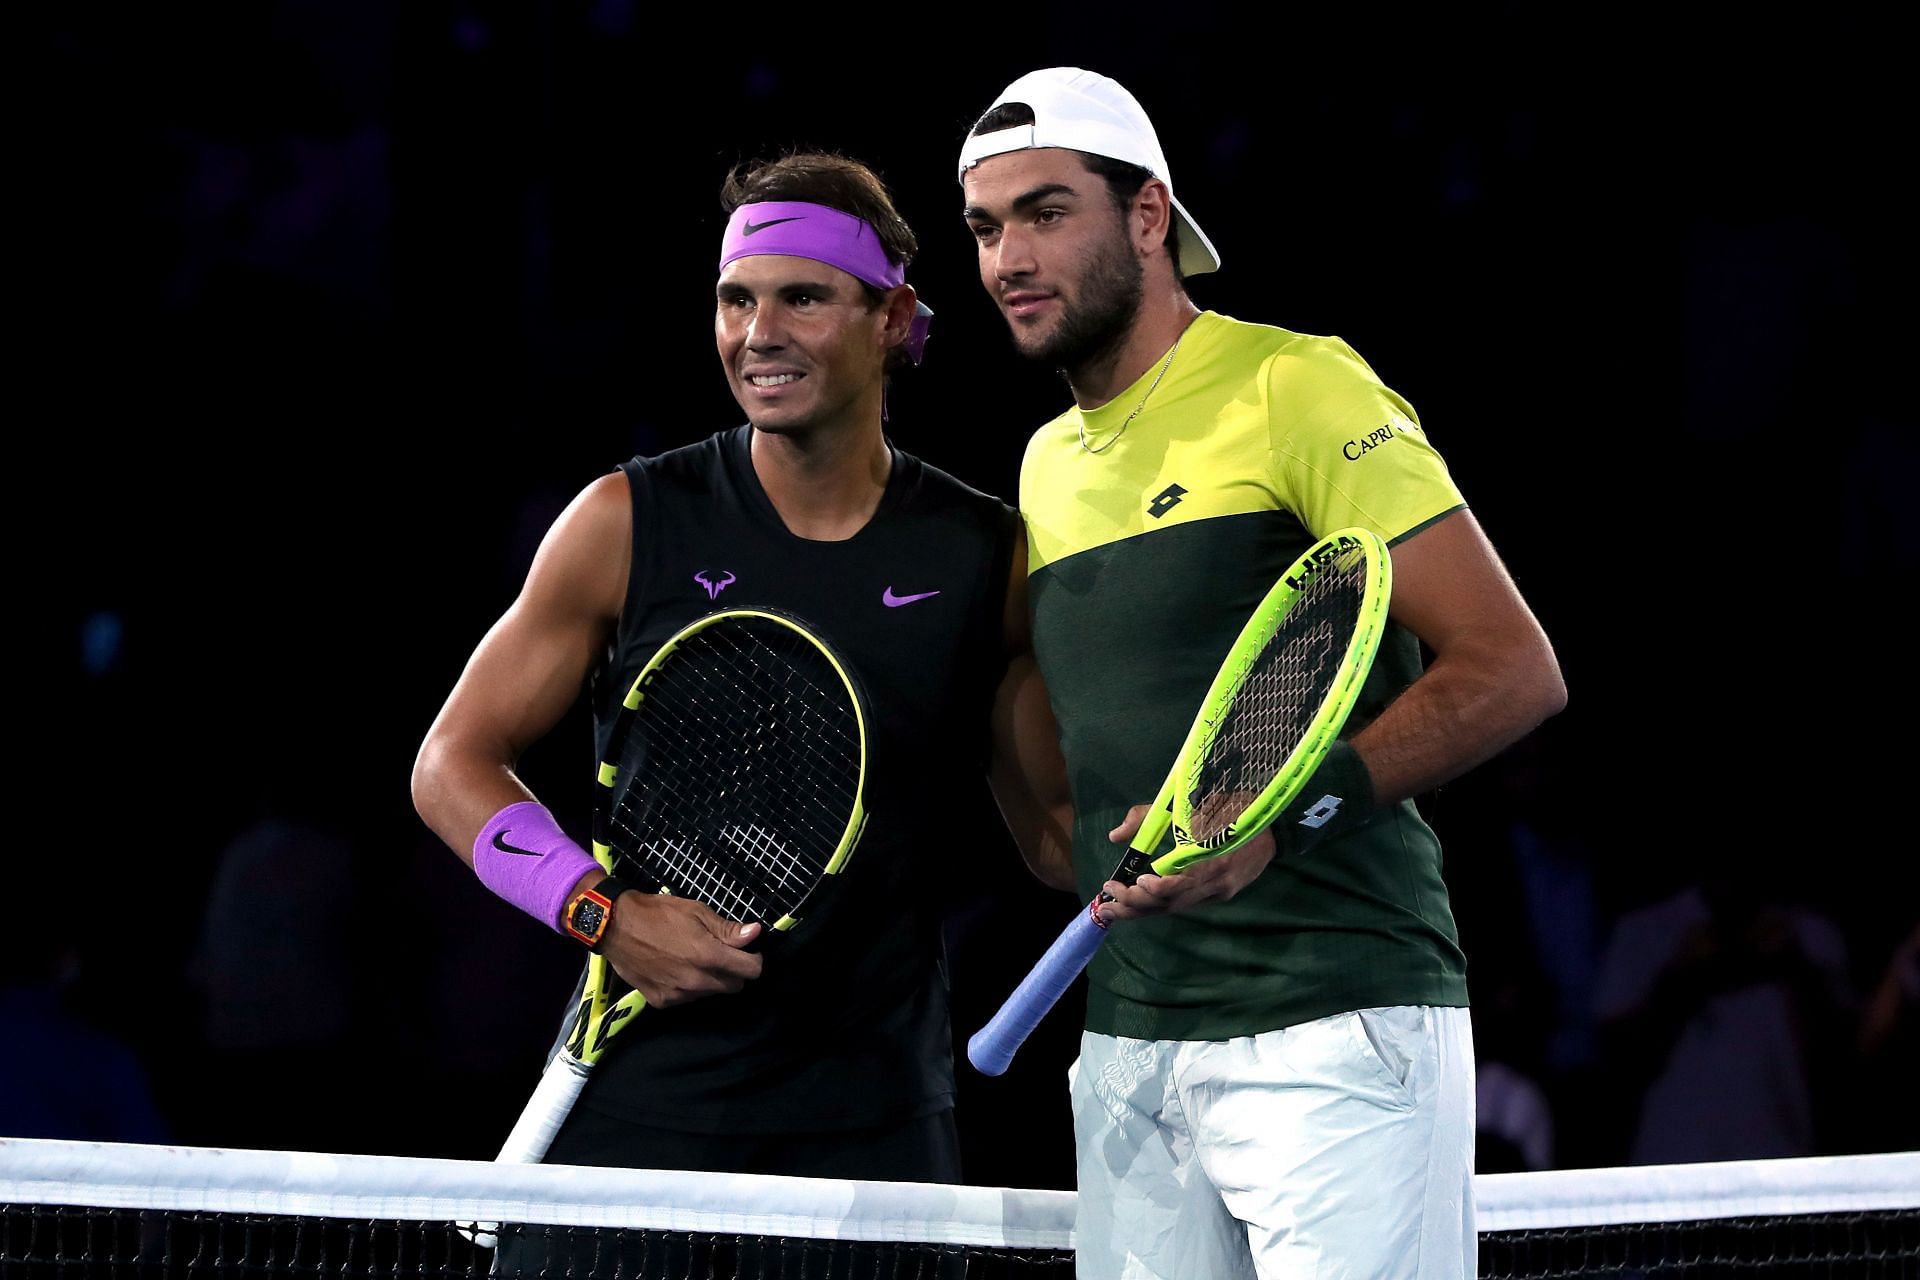 Rafael Nadal and Matteo Berrettini could meet in the quarterfinals this year, if things go their way